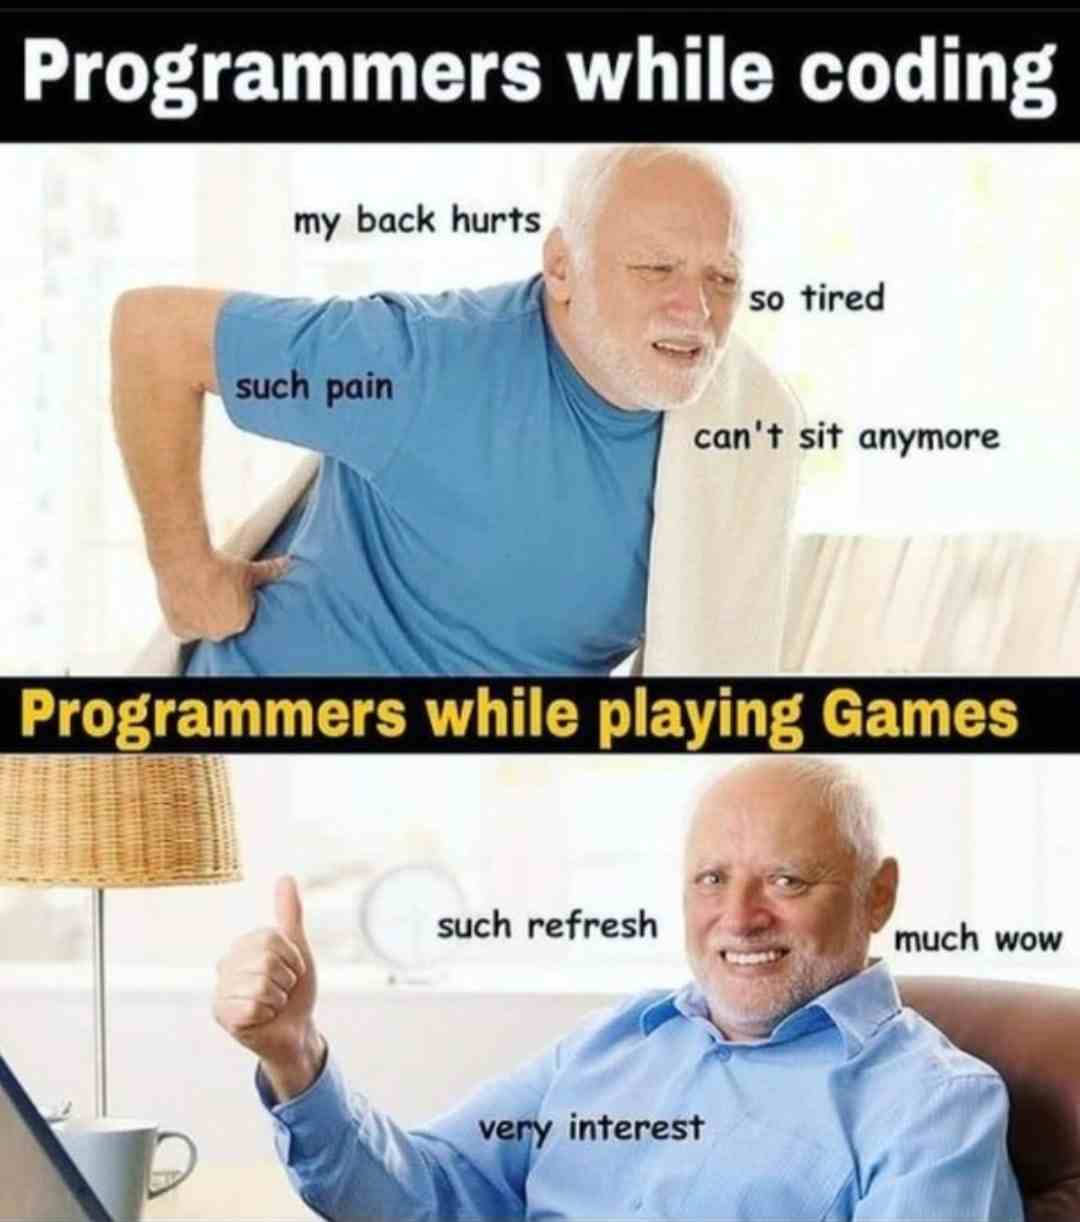 Programmers while coding vs Programmers while playing games